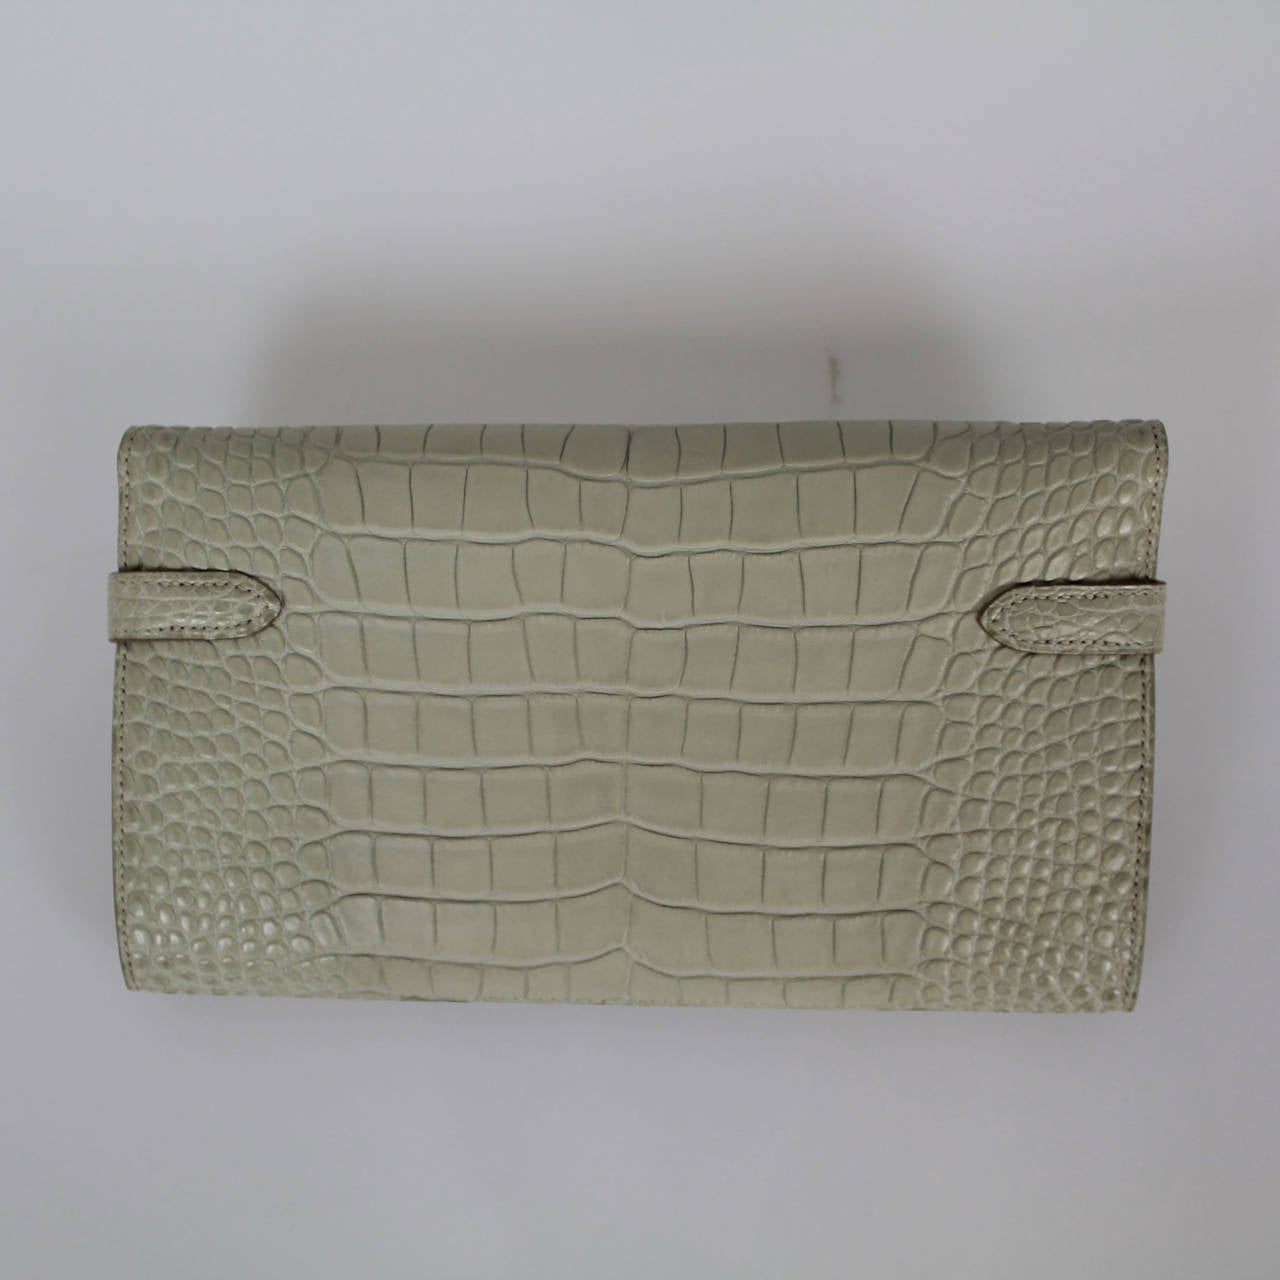 Hermes crocodile made wallet, which is extremely delicate and rare, with an enviable quality and finesse. 

Includes:
-Hermes Box 

Specifics:
-Blue Matte Crocodile 
-Palladium Hardware 
-(12) Credit Card Slots
-(2) Interior